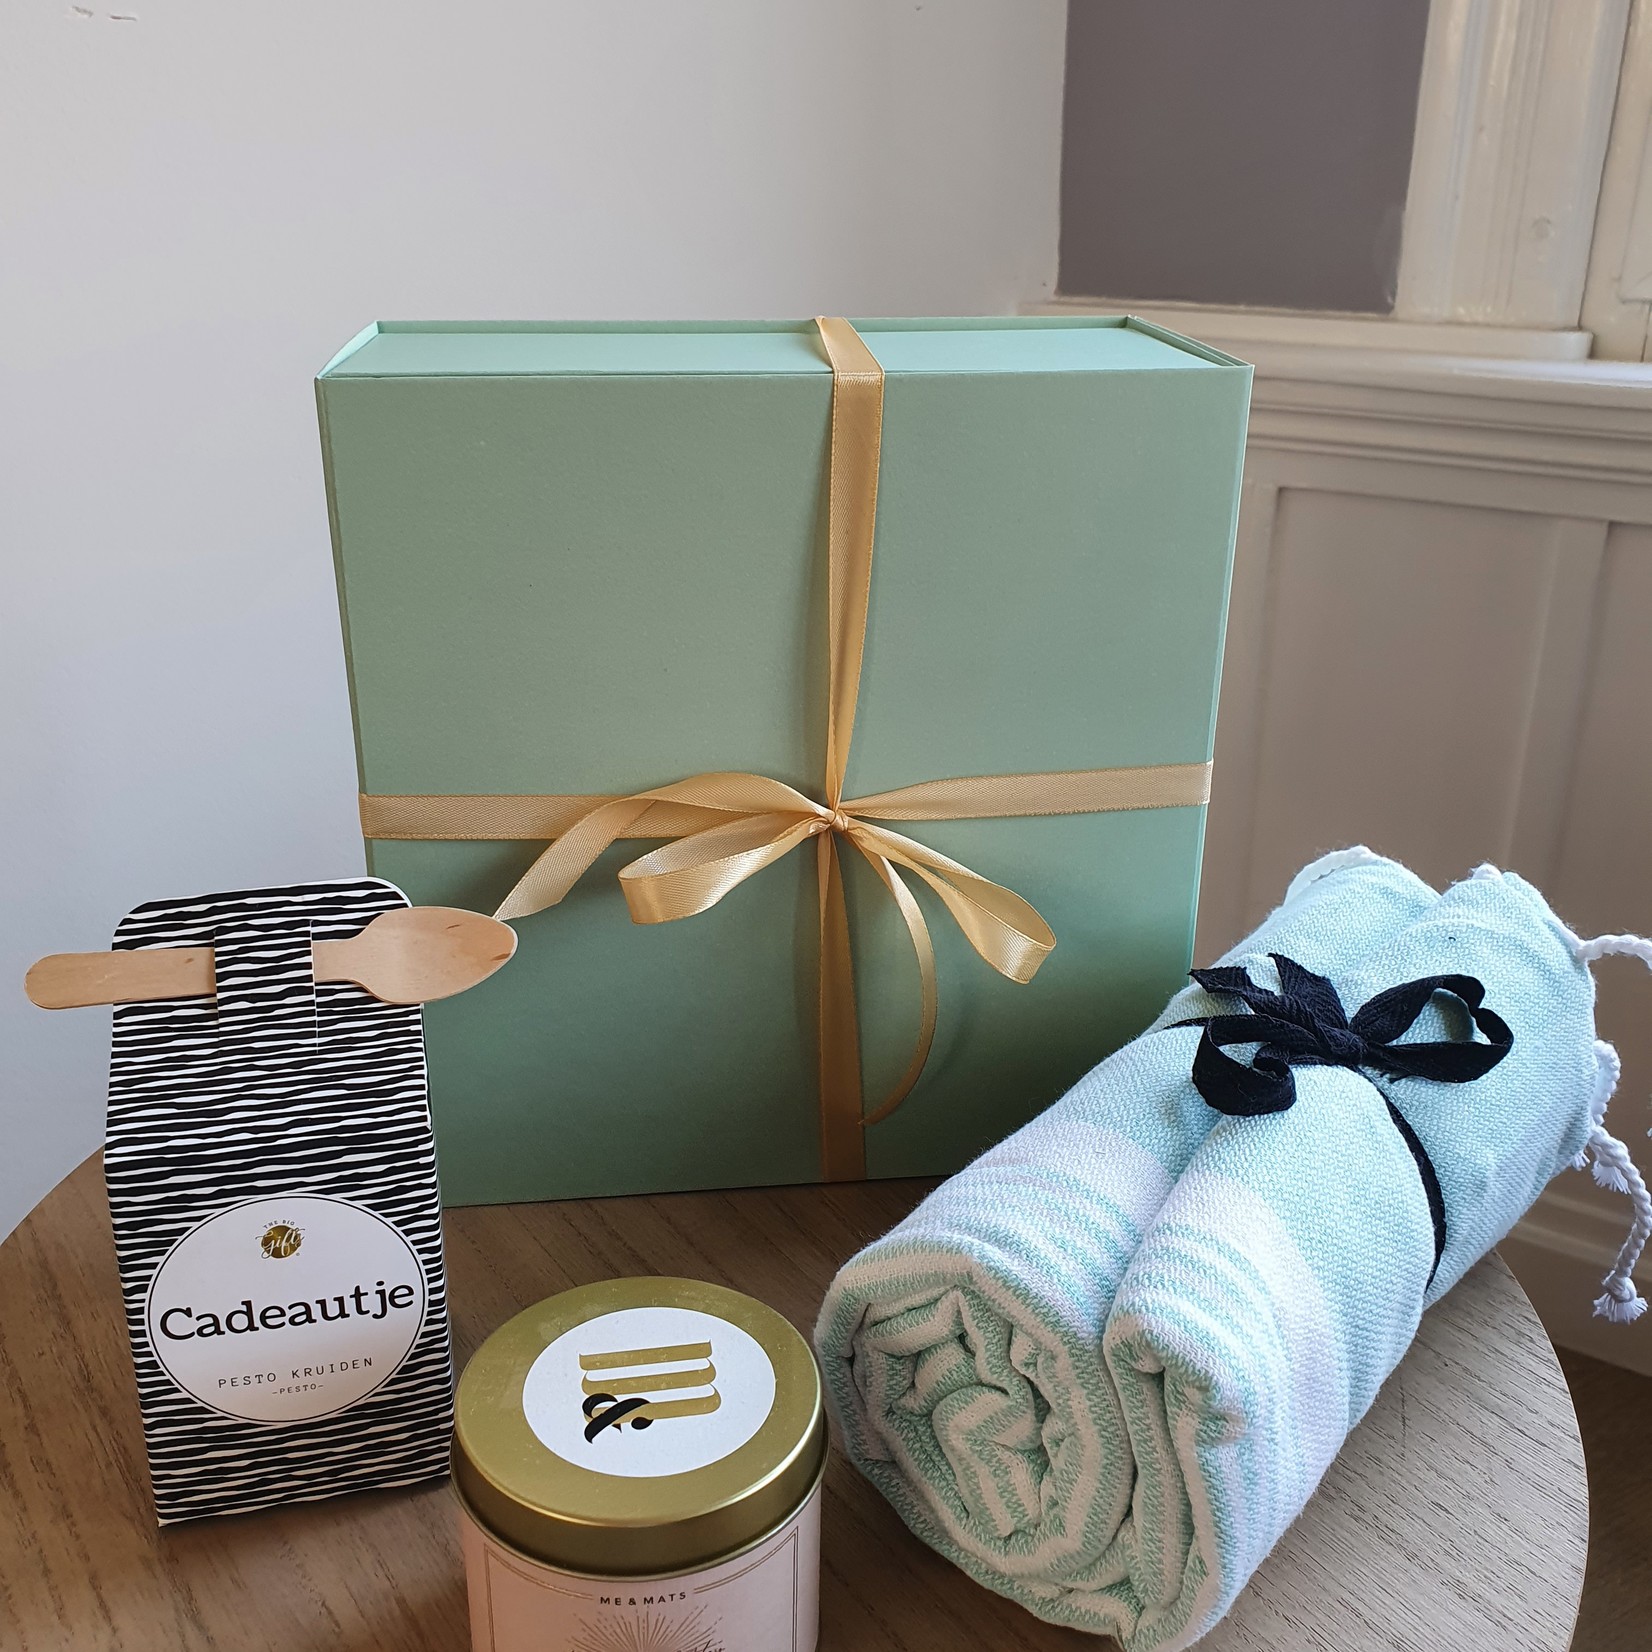 Eve's Gifts Gift Box Mint- cadeautje candle